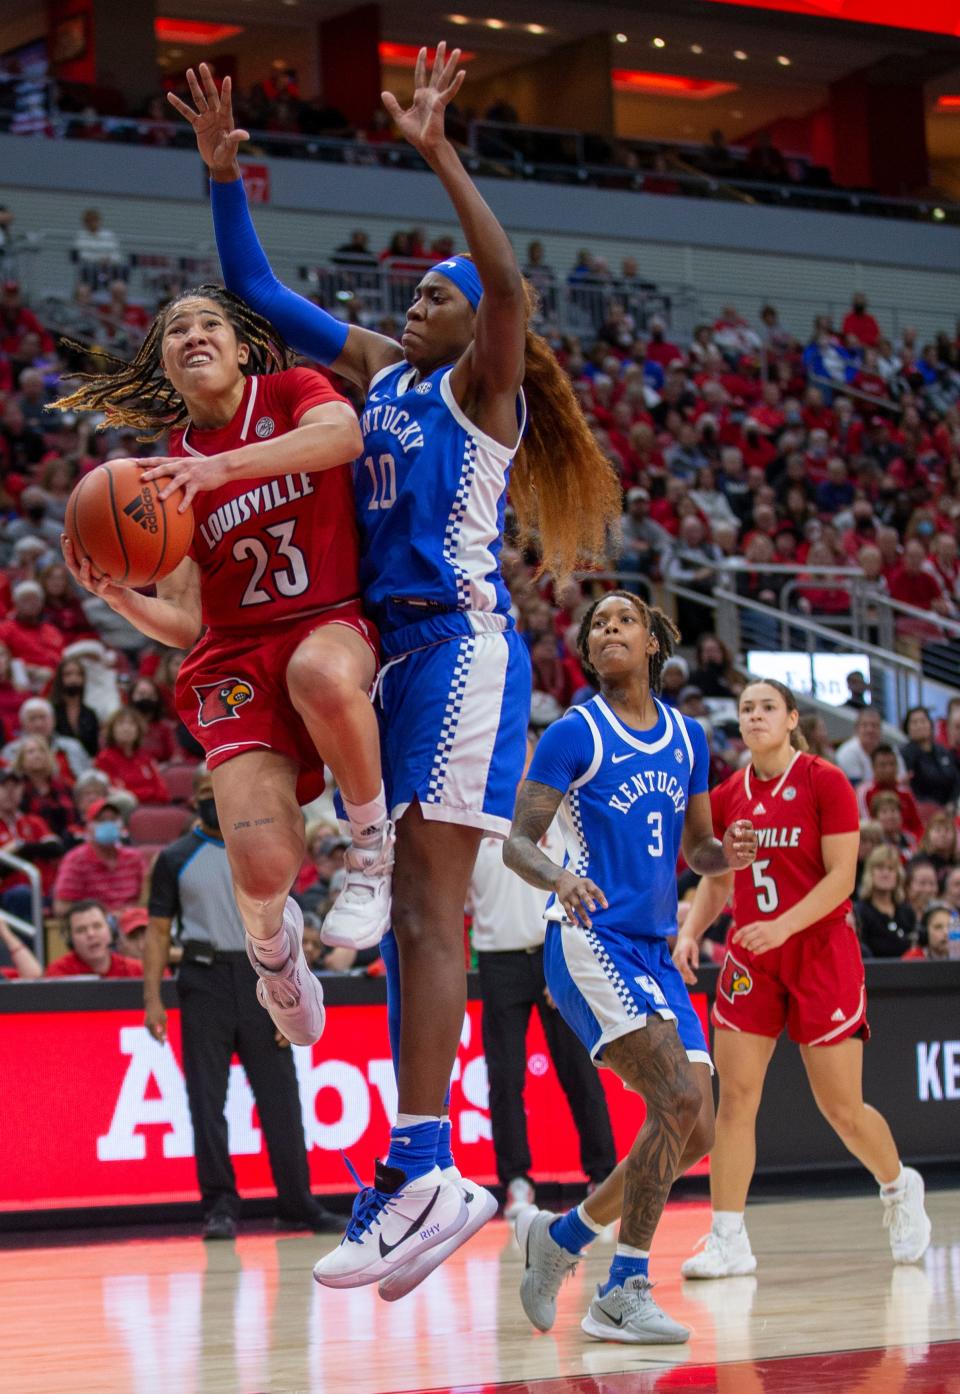 Louisville's Chelsie Hall drives to the basket against Kentucky's Rhyne Howard at the YUM Center. Dec. 12, 2021